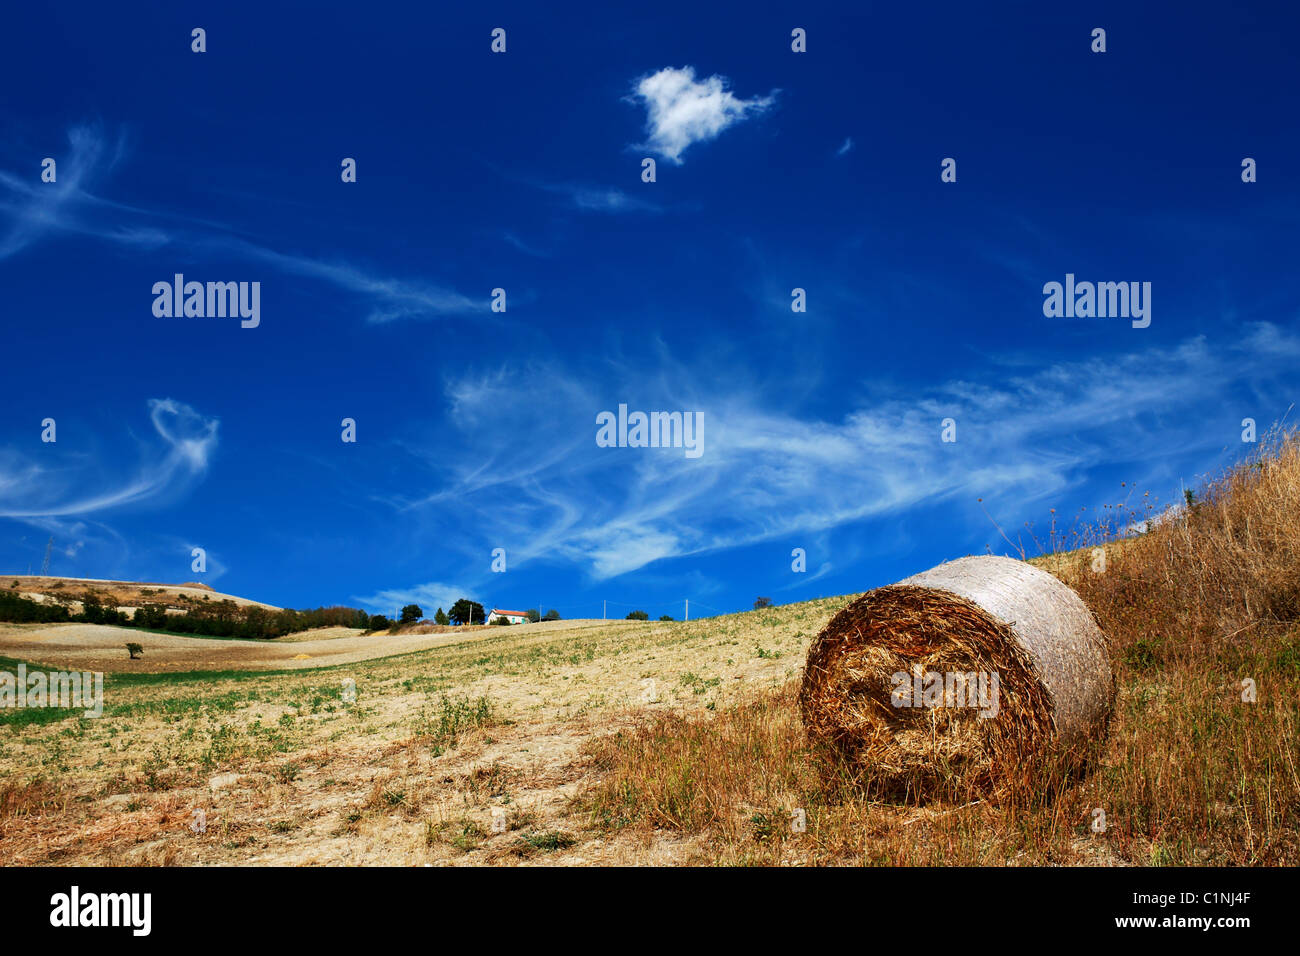 Golden dry field with interesting blue sky and hay bale Stock Photo